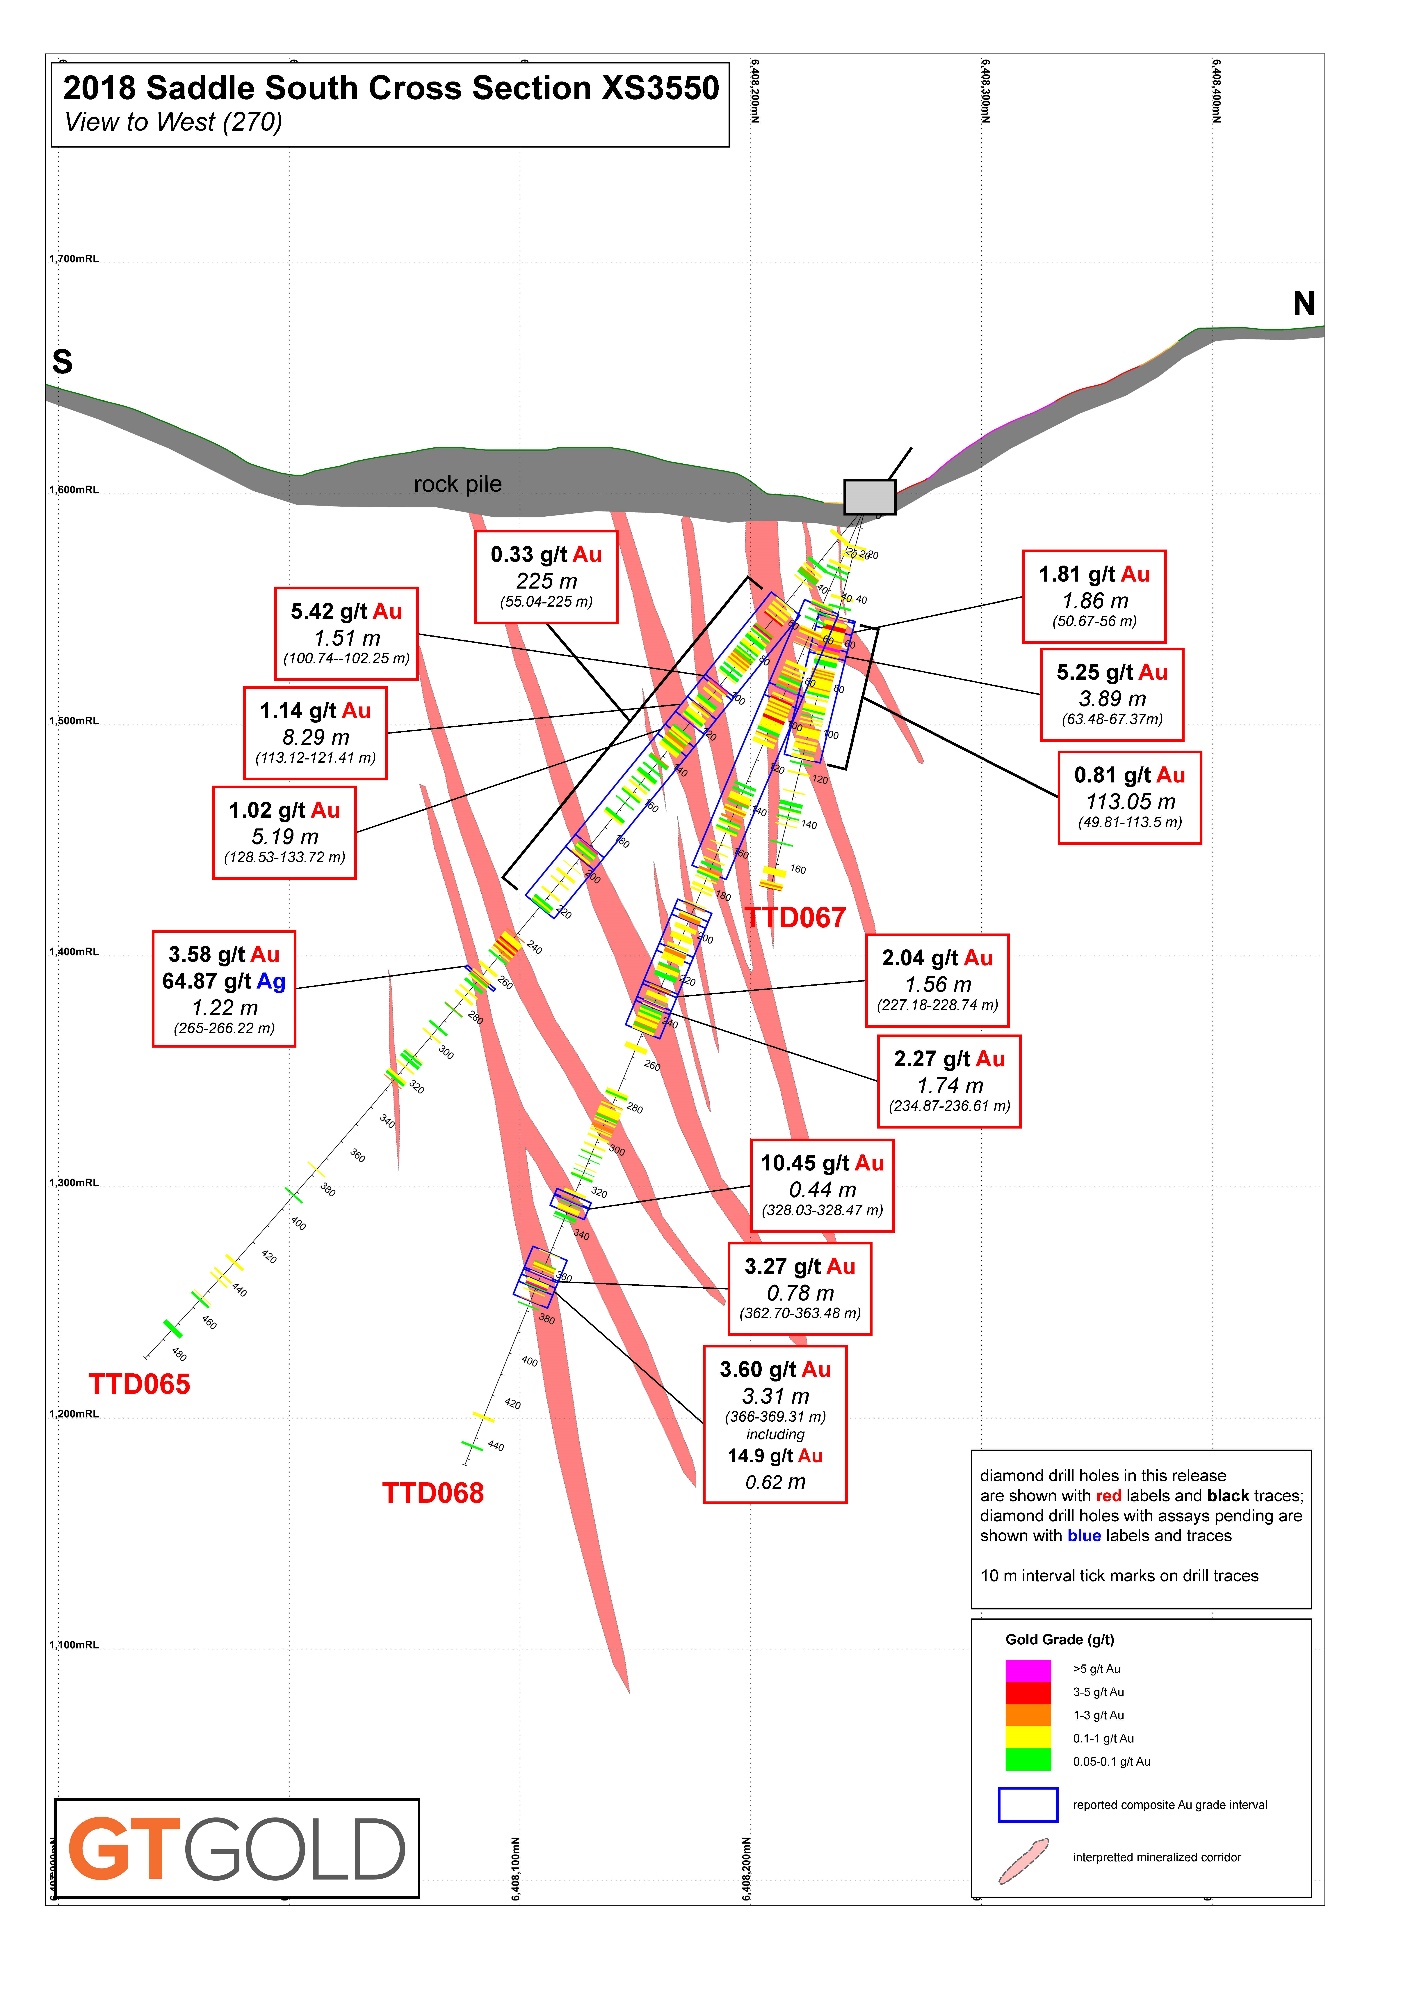 Saddle South Drilling Cross-Section 3550, August 8, 2018